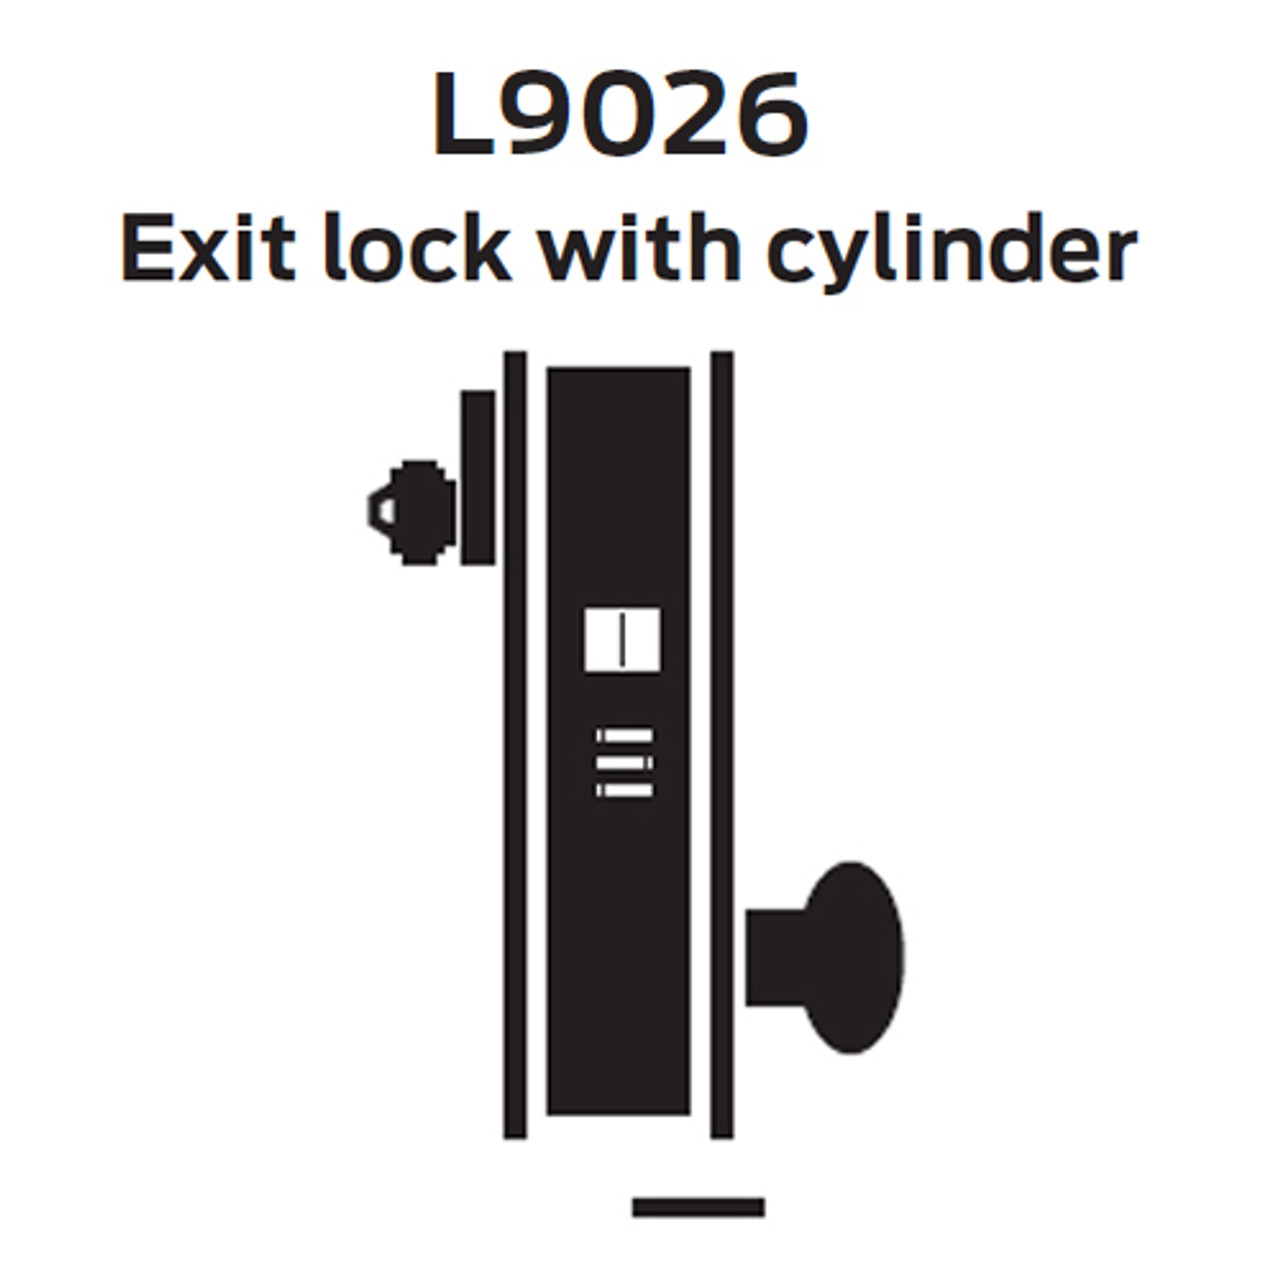 L9026L-17L-619 Schlage L Series Less Cylinder Exit Lock with Cylinder Commercial Mortise Lock with 17 Cast Lever Design in Satin Nickel